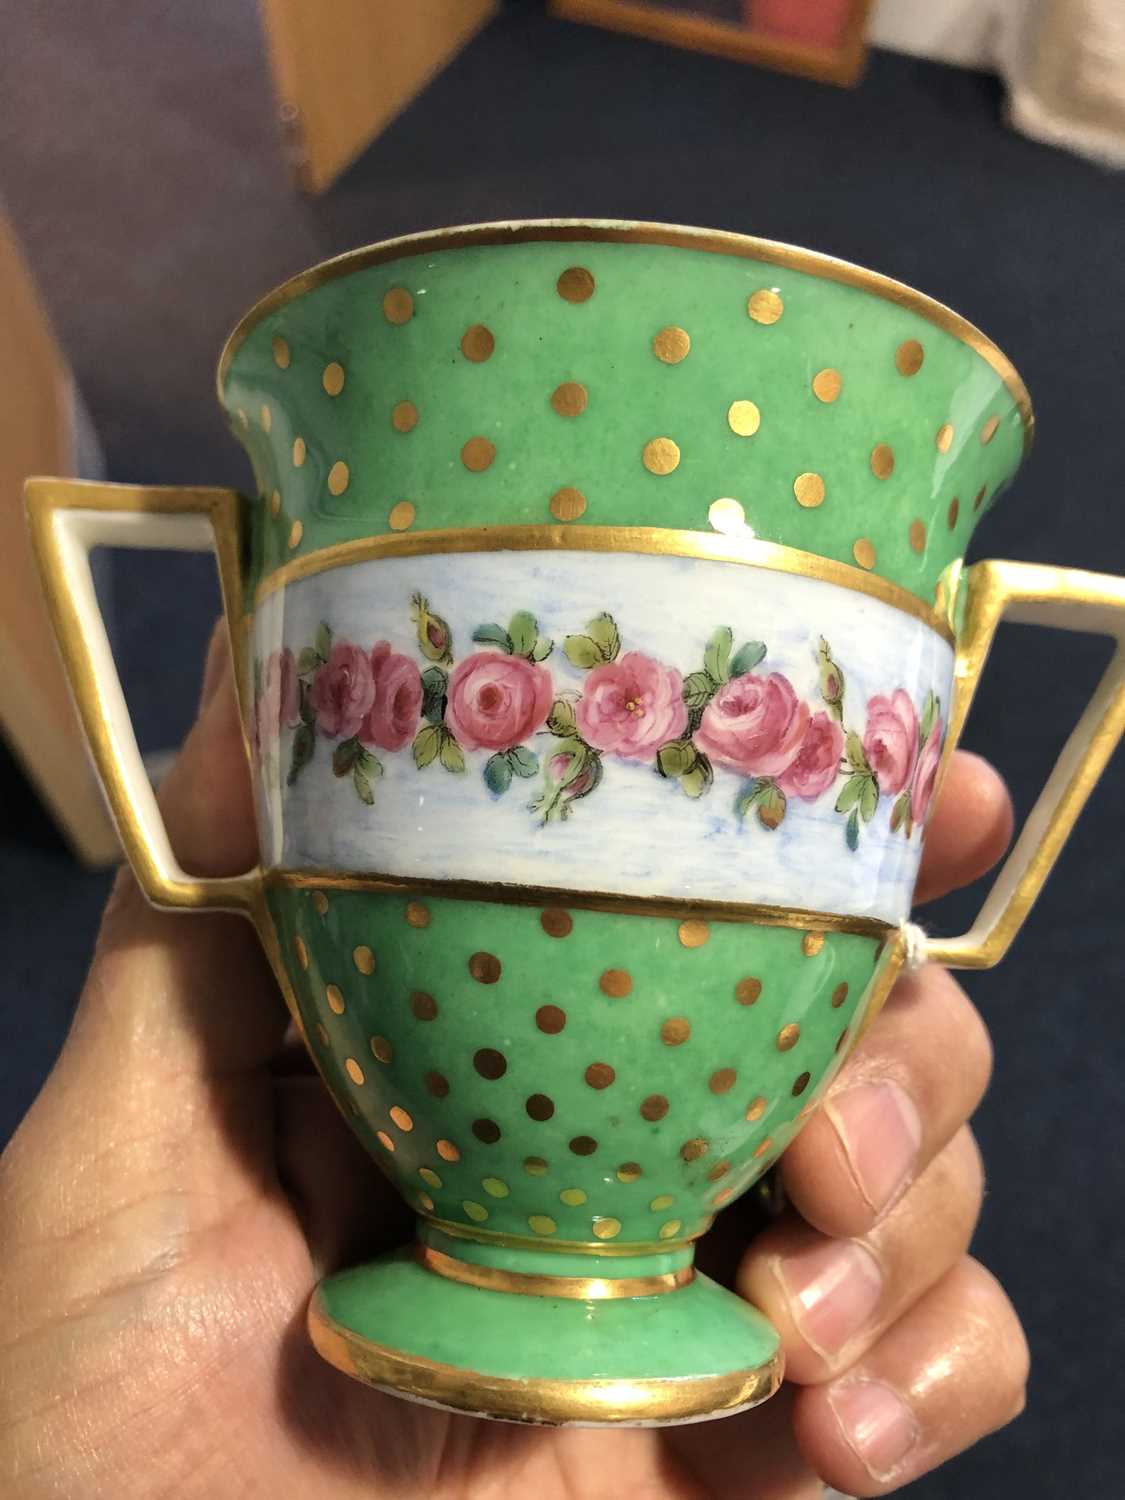 A late 18th century Serves two handled cup, with a raised central band decorated with roses and - Image 12 of 14